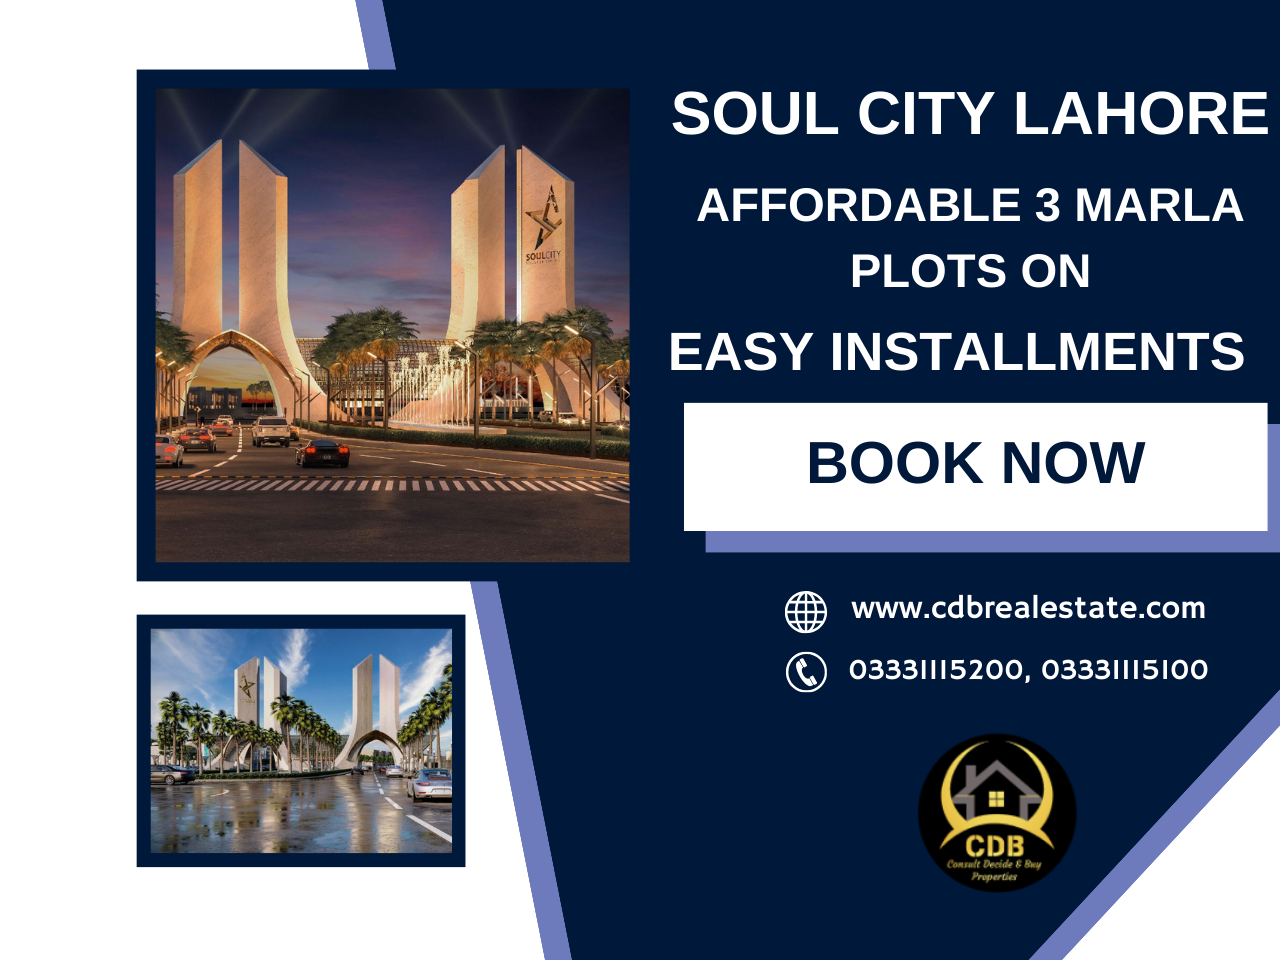 Soul City Lahore Affordable 3 Marla Plots on Easy Installments